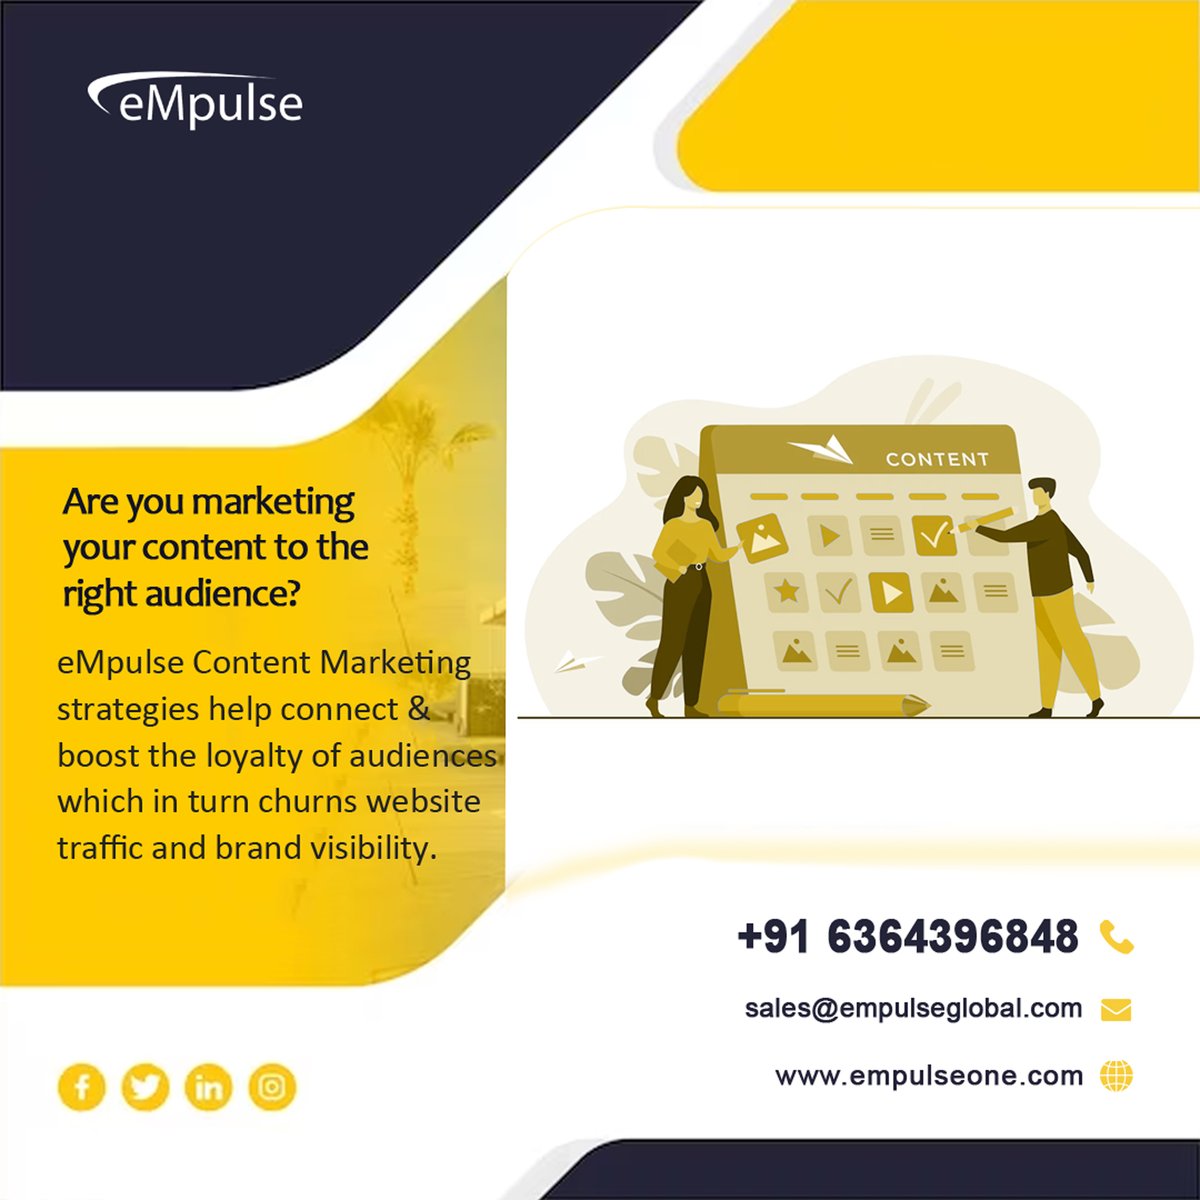 Are you marketing your content to the right audience? eMpulse Content Marketing strategies help connect & boost the loyalty of audiences which in turn churns website traffic and brand visibility. Visit: empulseglobal.com #empulseglobal #ContentMarketing #BoostEngagement